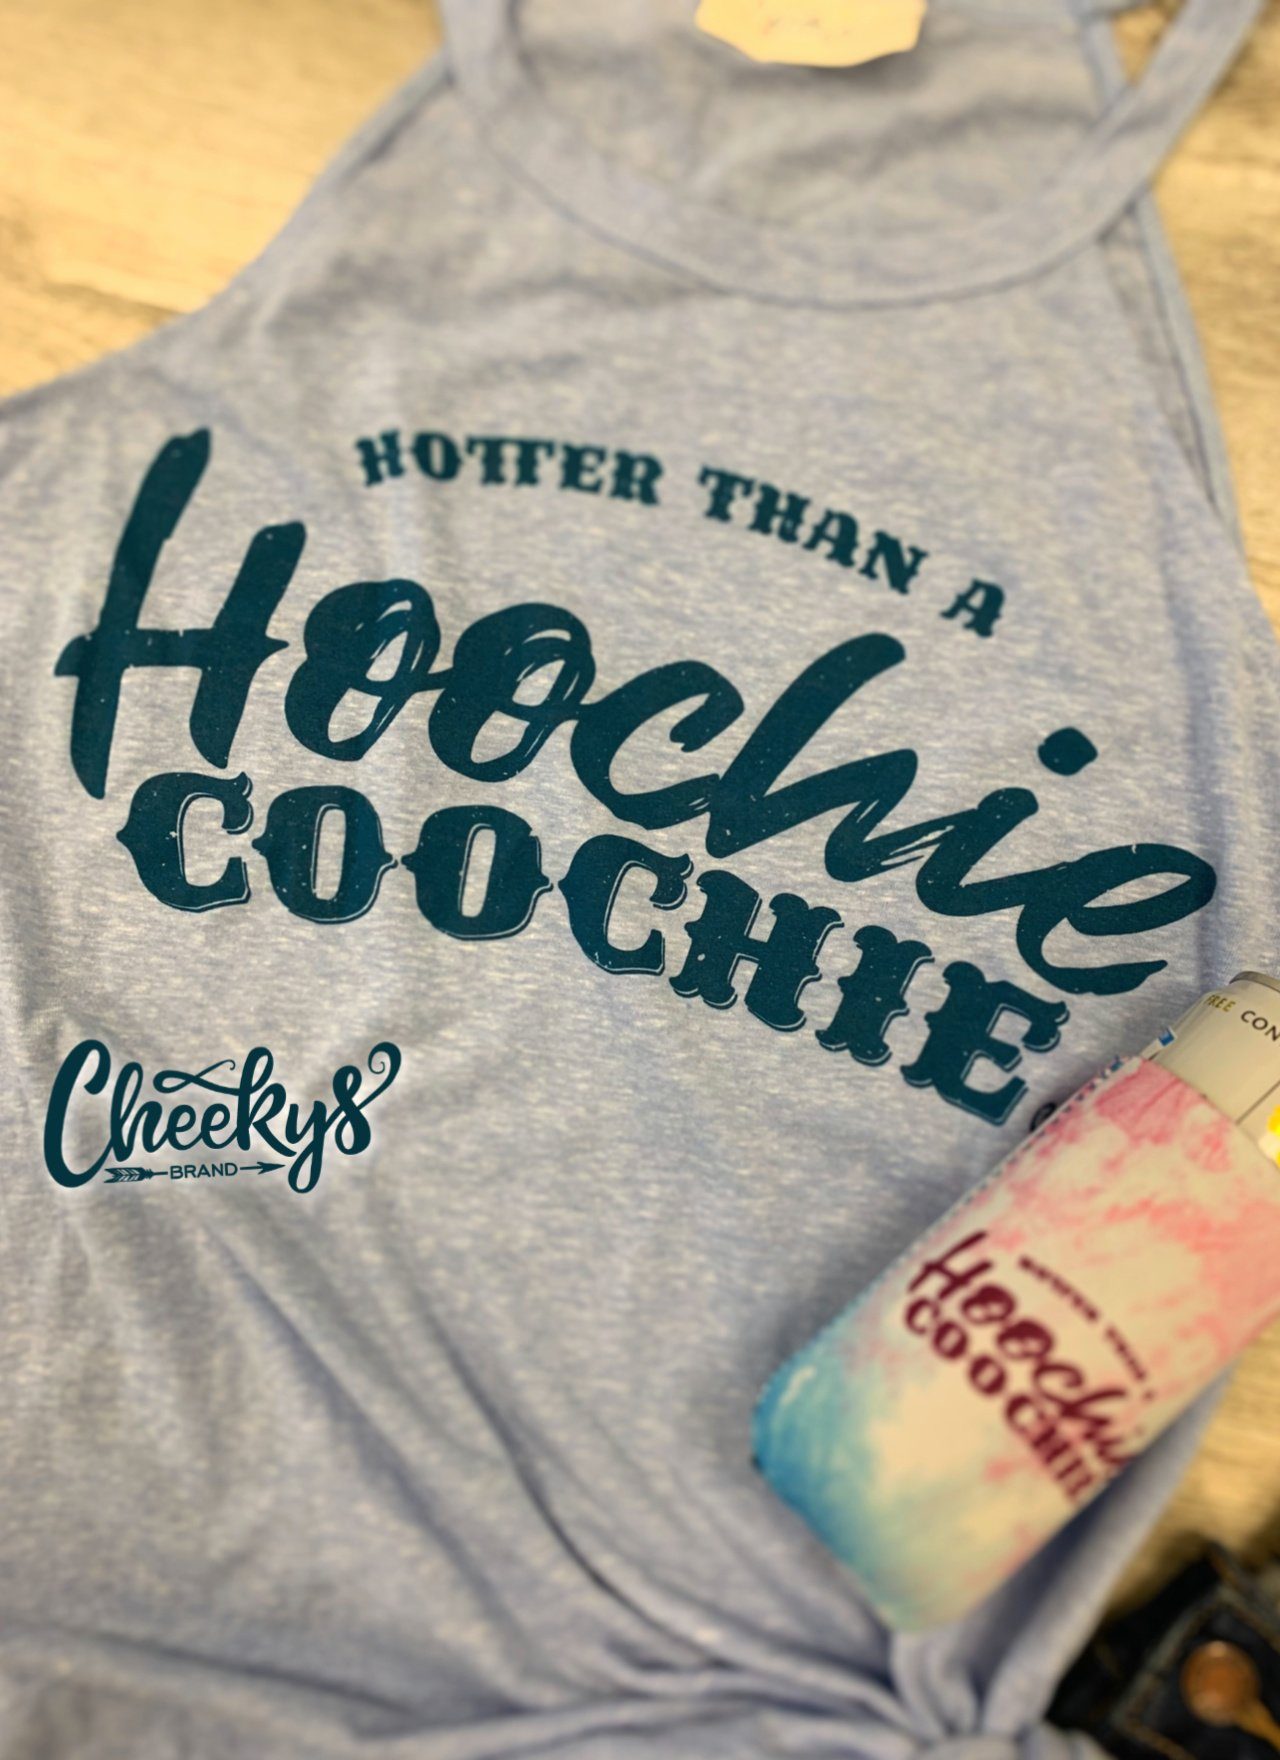 Hotter Than a Hoochie Coochie Tank on Periwinkle Cheekys Apparel 23 